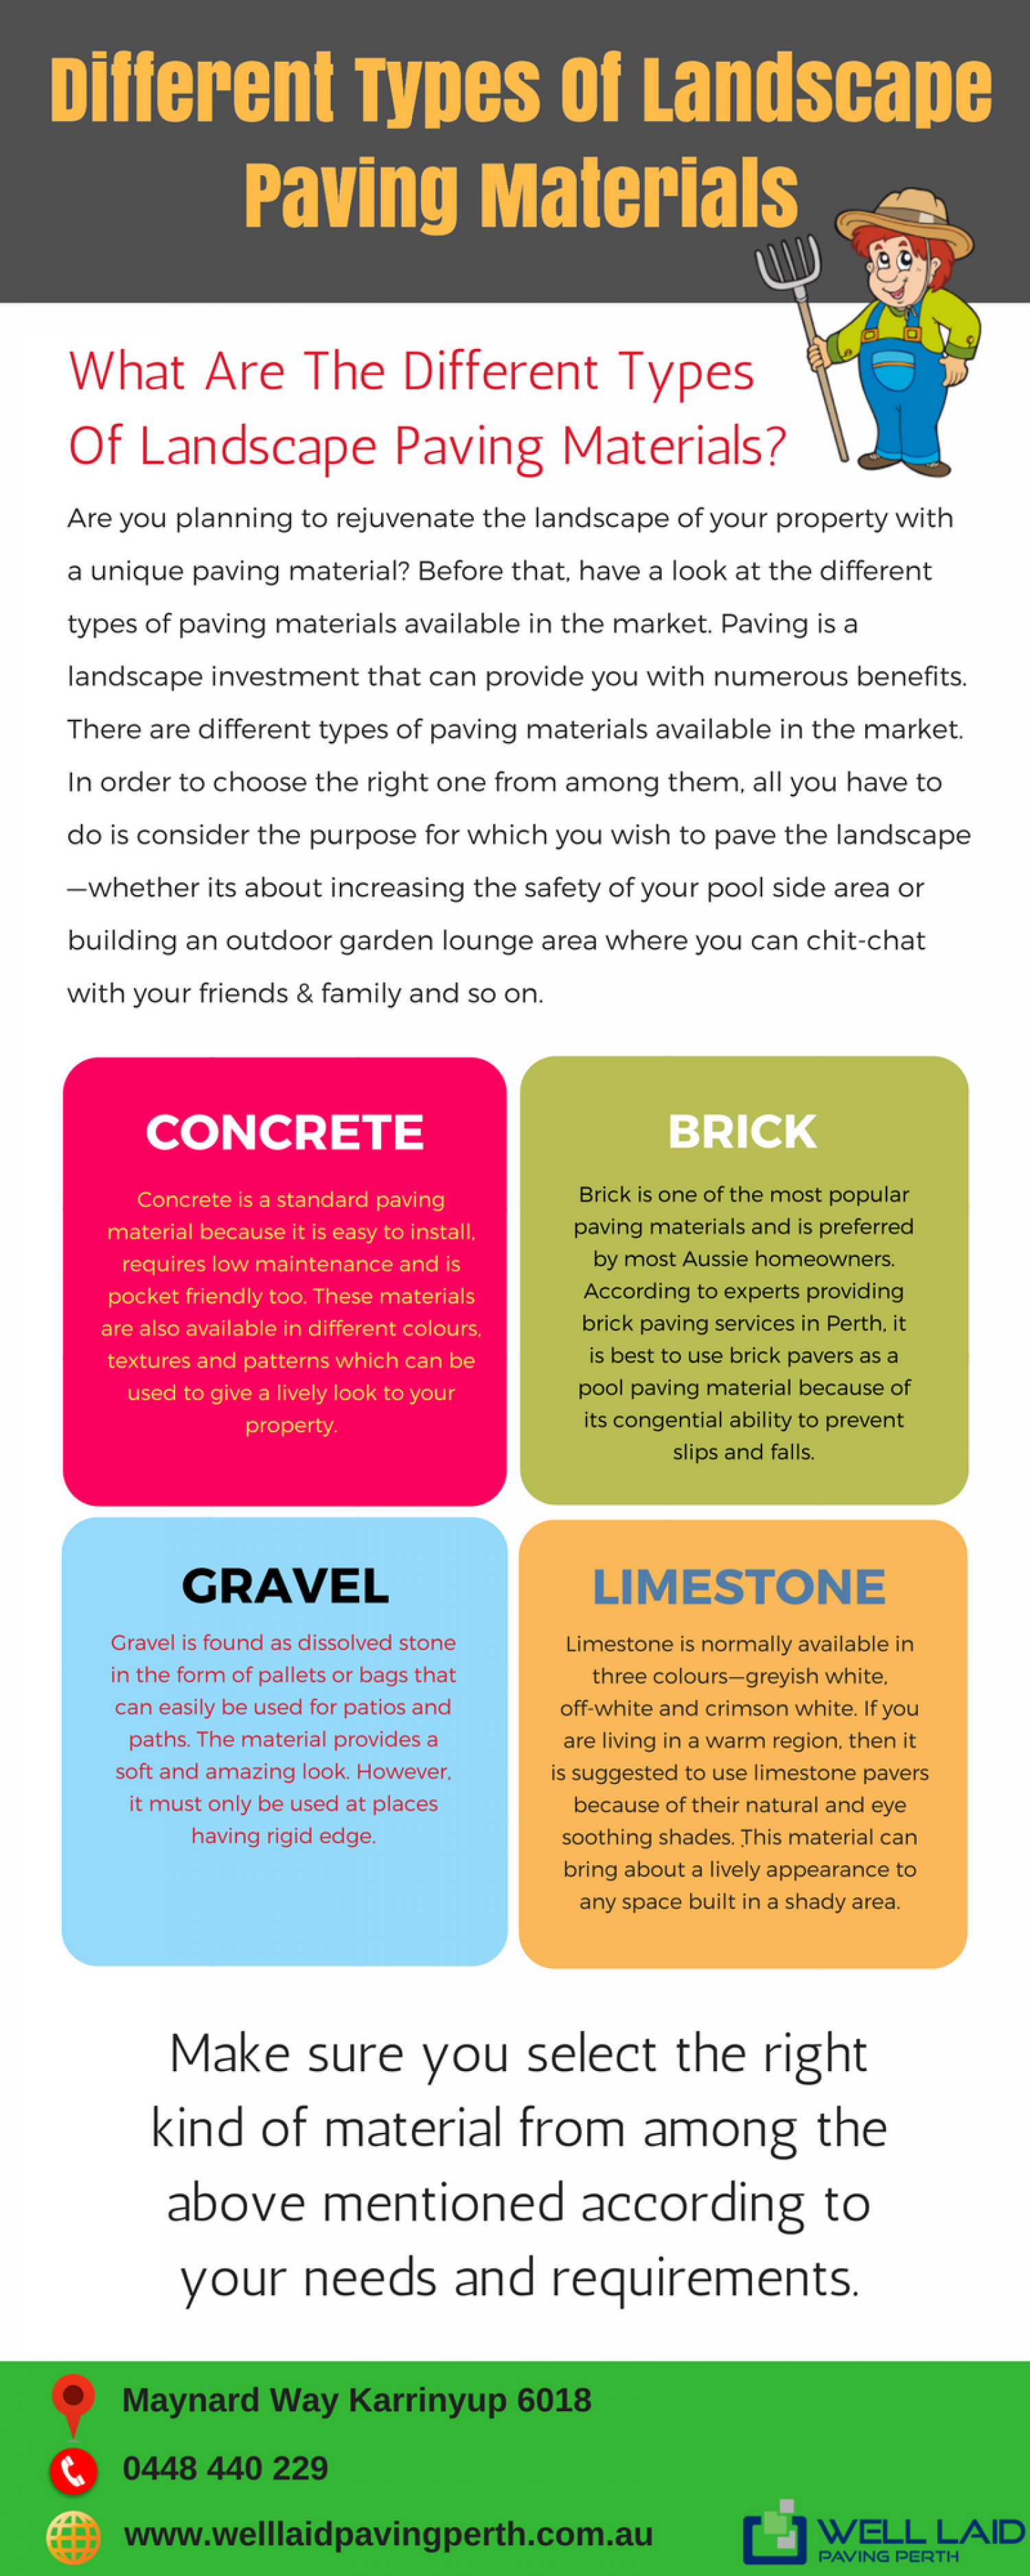 Different Types Of Landscape Paving Materials Infographic